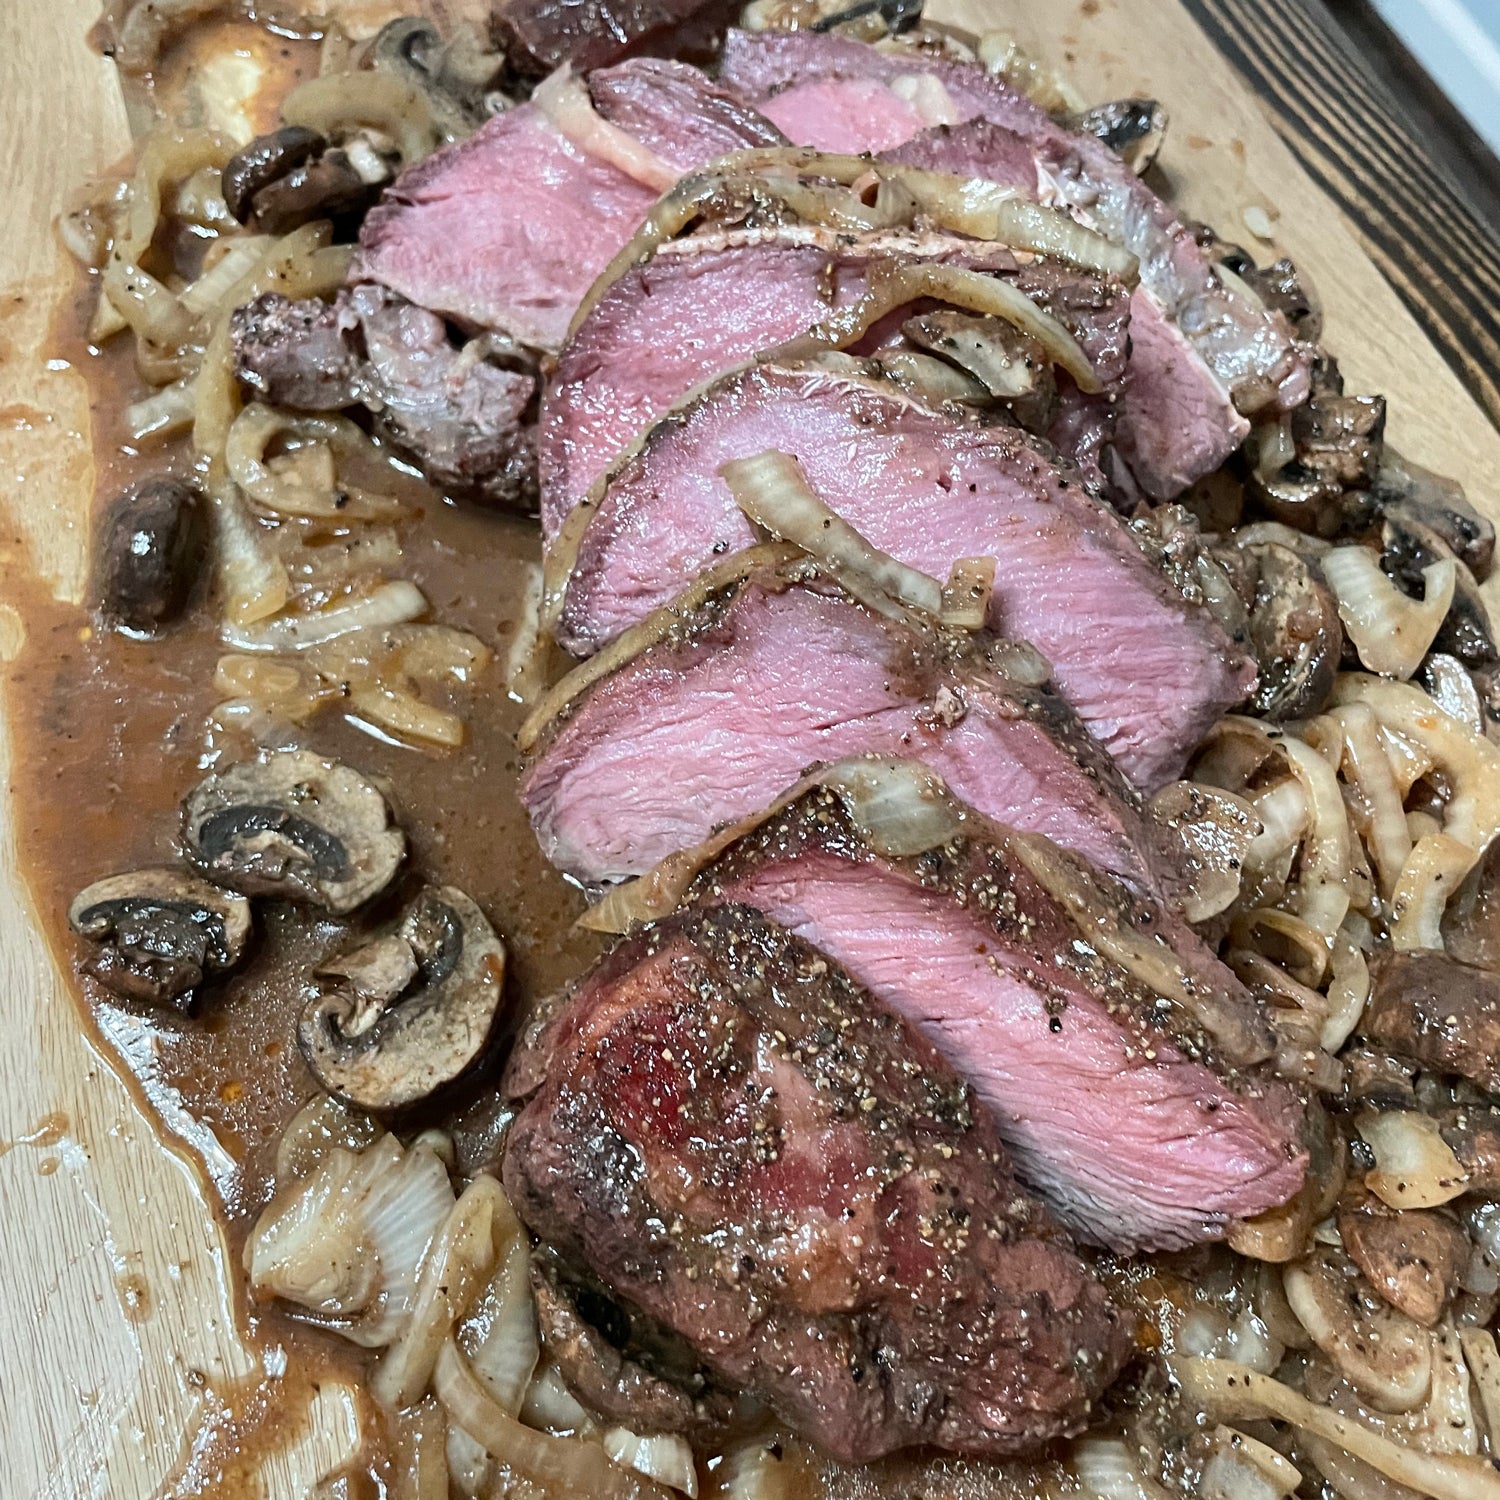 The W Sauce on Steak and Mushrooms